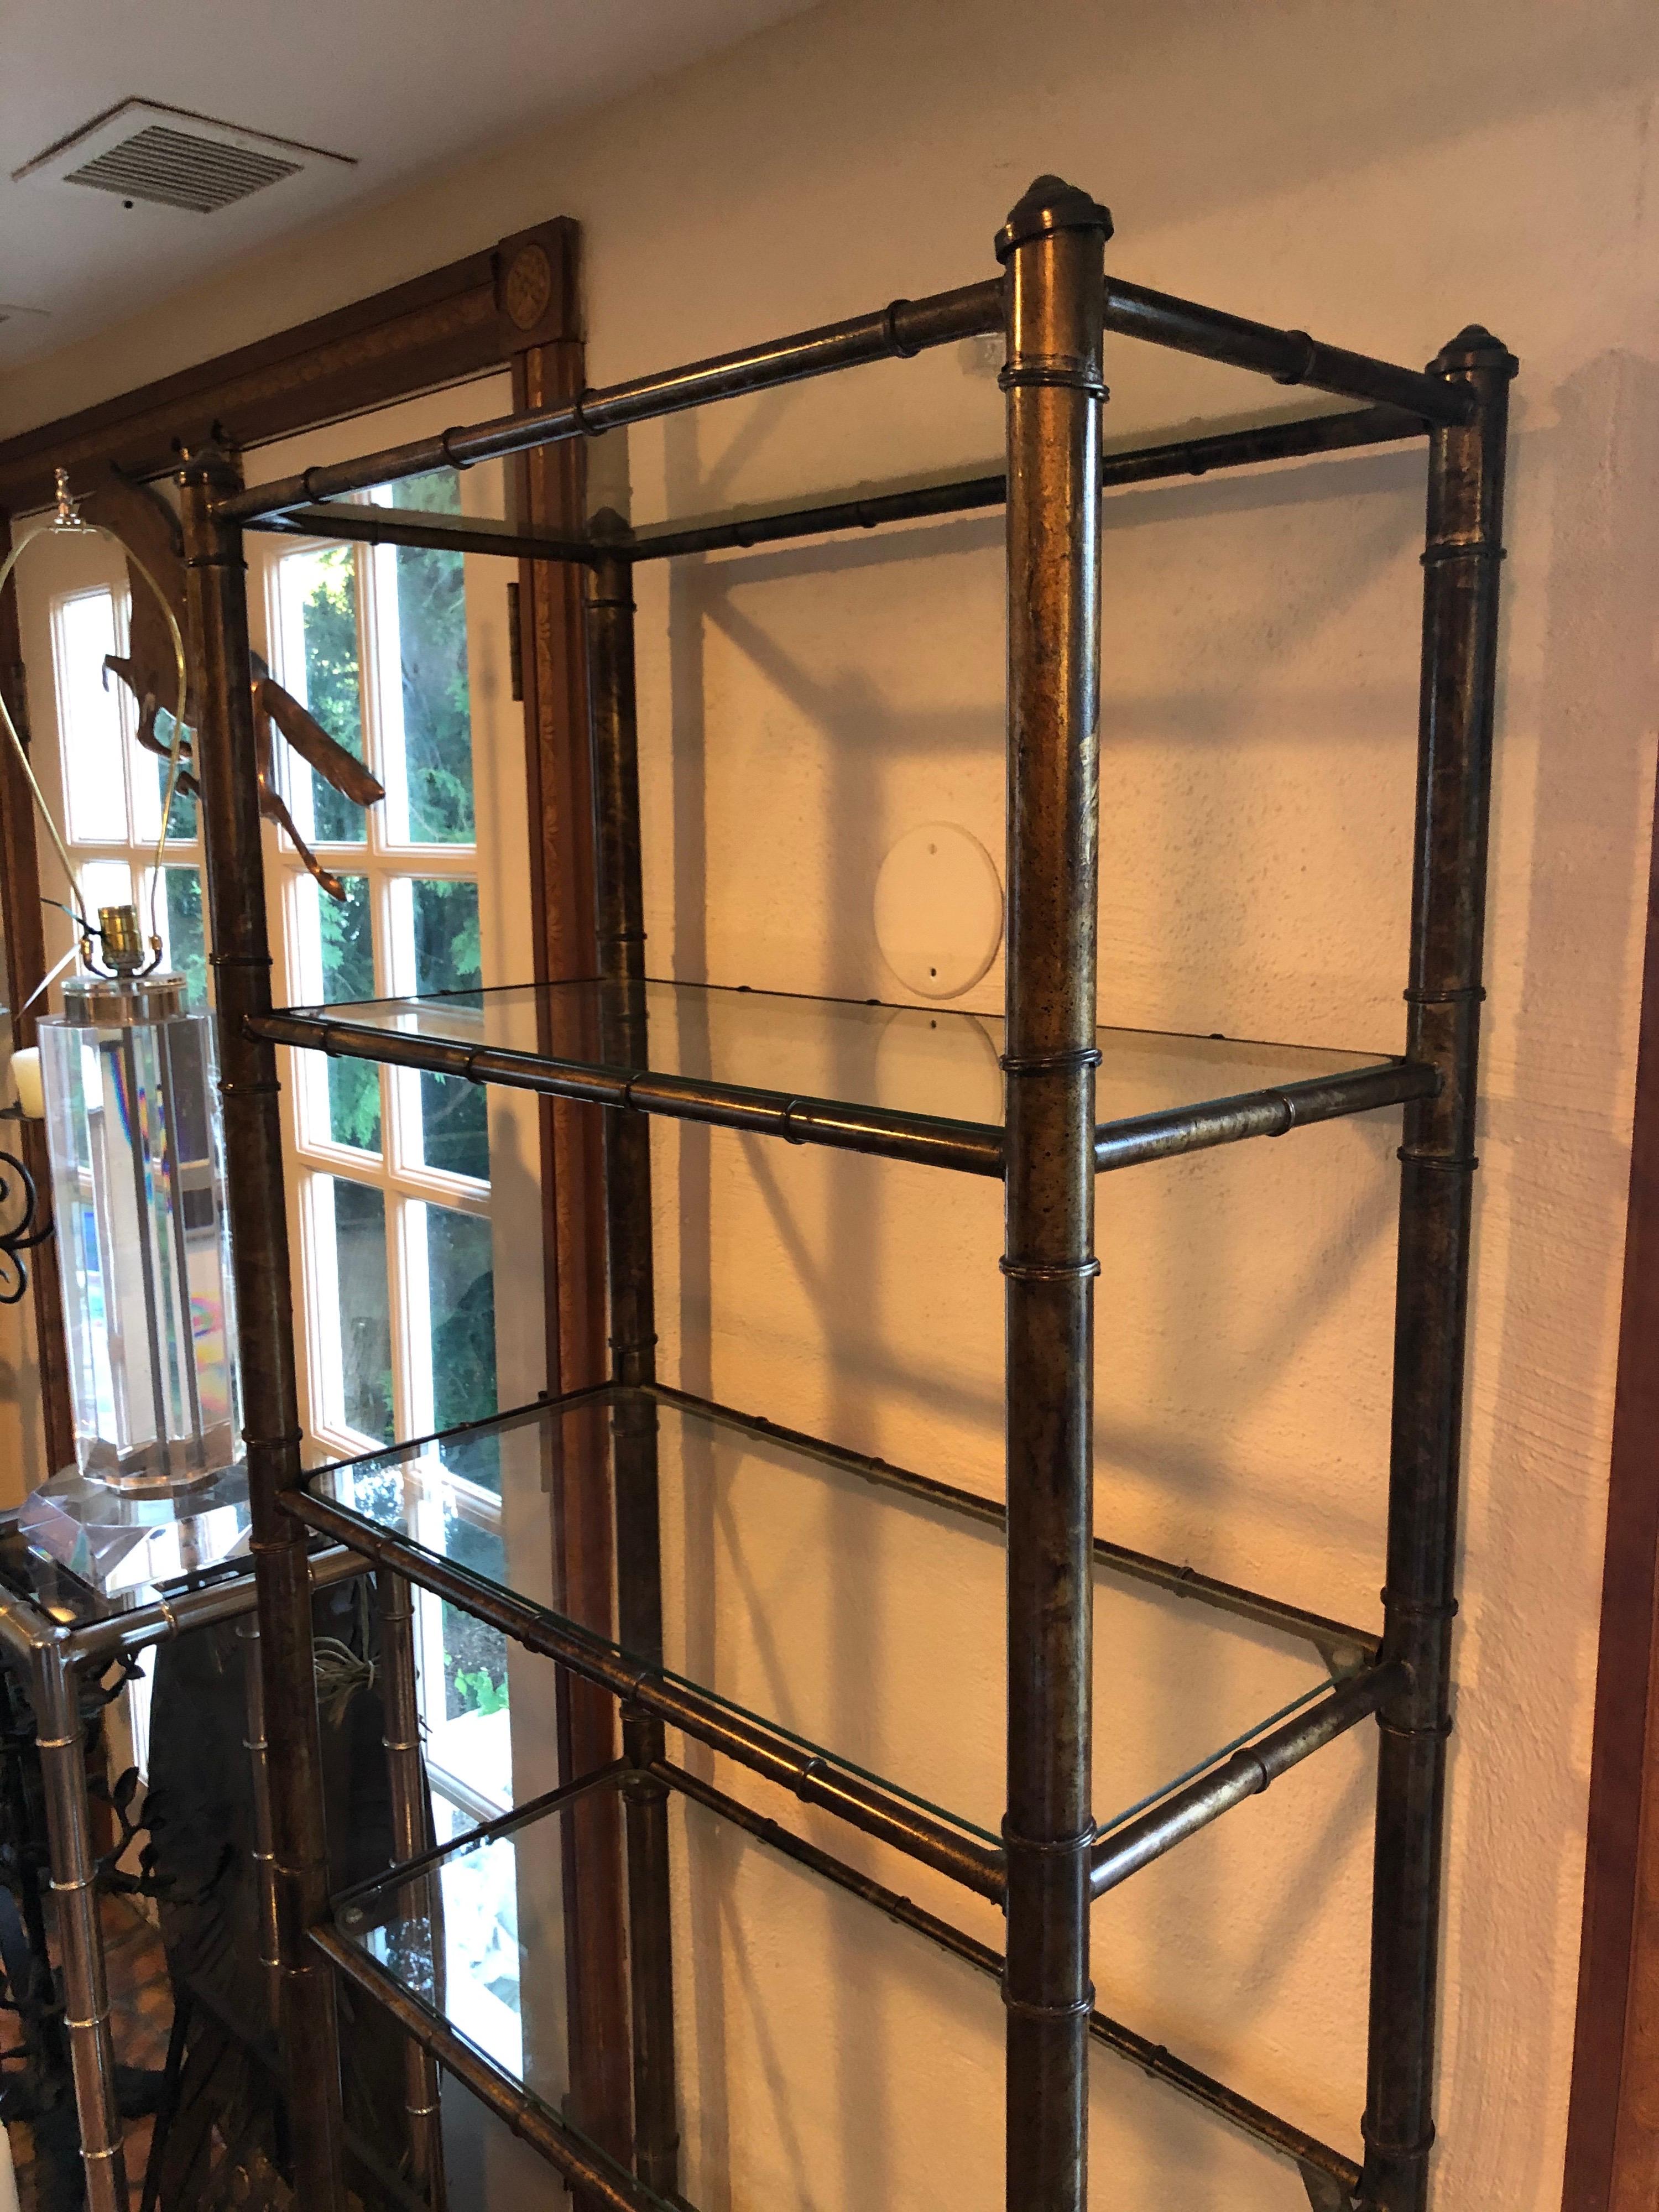 Hollywood Regency faux bamboo étagère. This lovely 6 shelf glass and metal bookcase has ample storage for your books or collectibles. Classic and timeless in style.